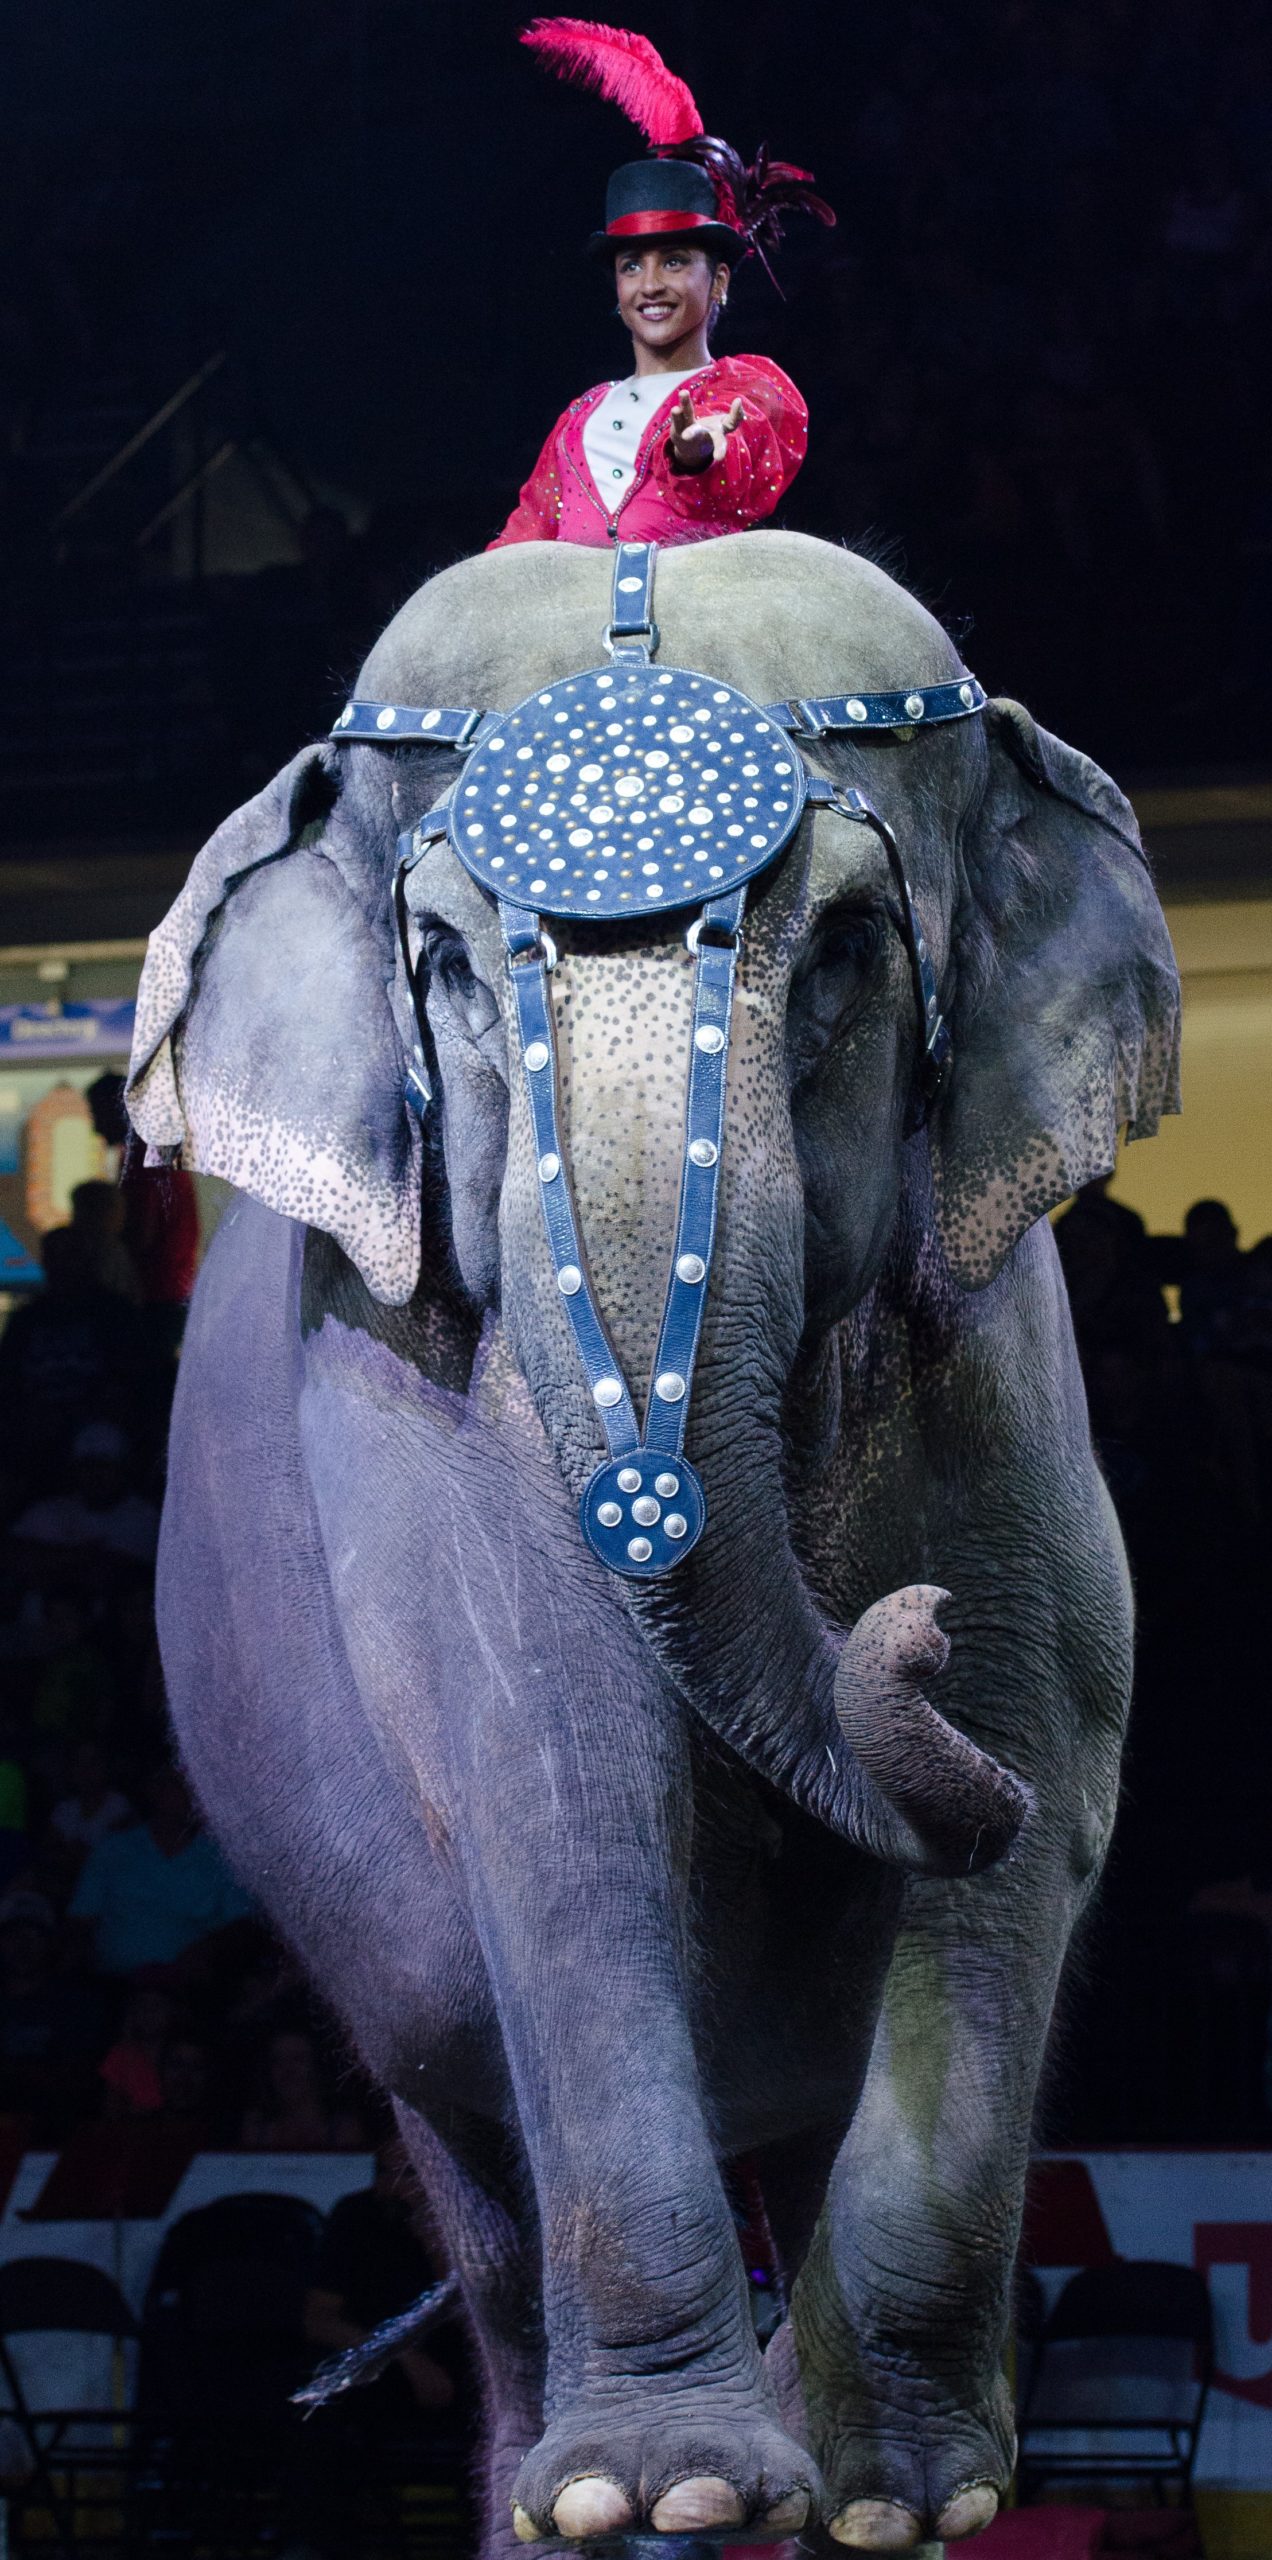 Bedazzled showgirl riding an elephant! 